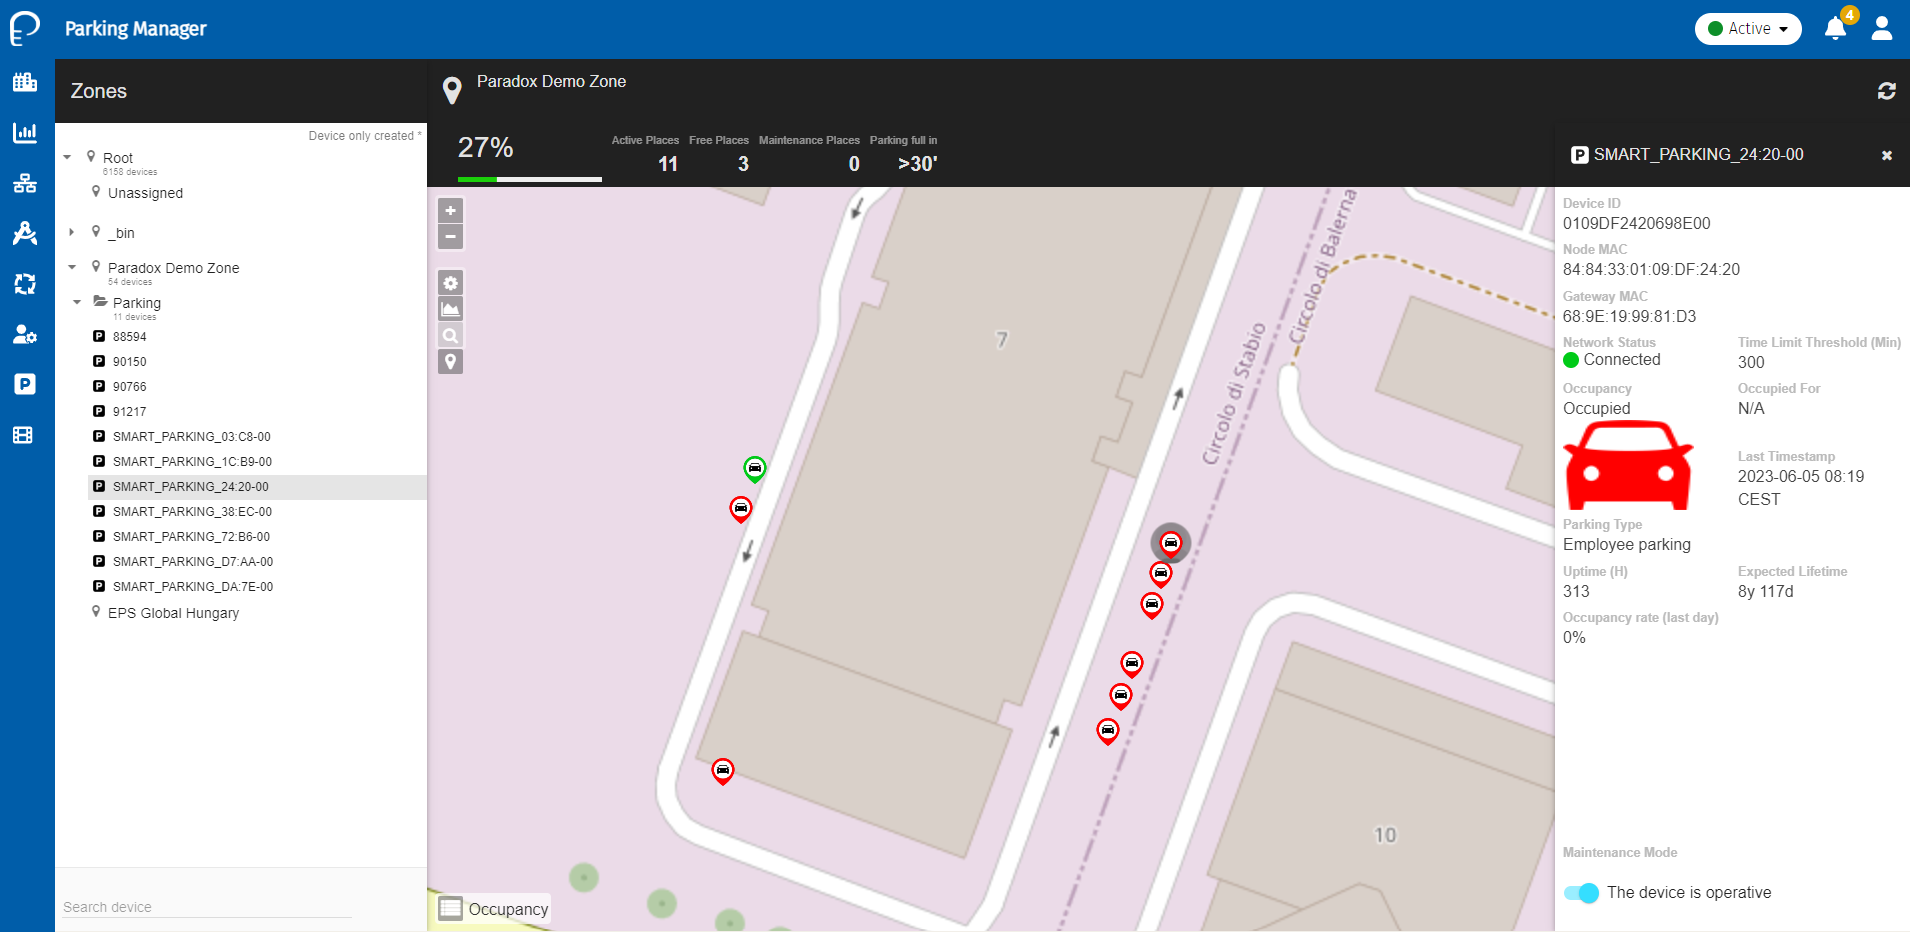 Smart CMS enables the full remote monitoring of parking facilities.